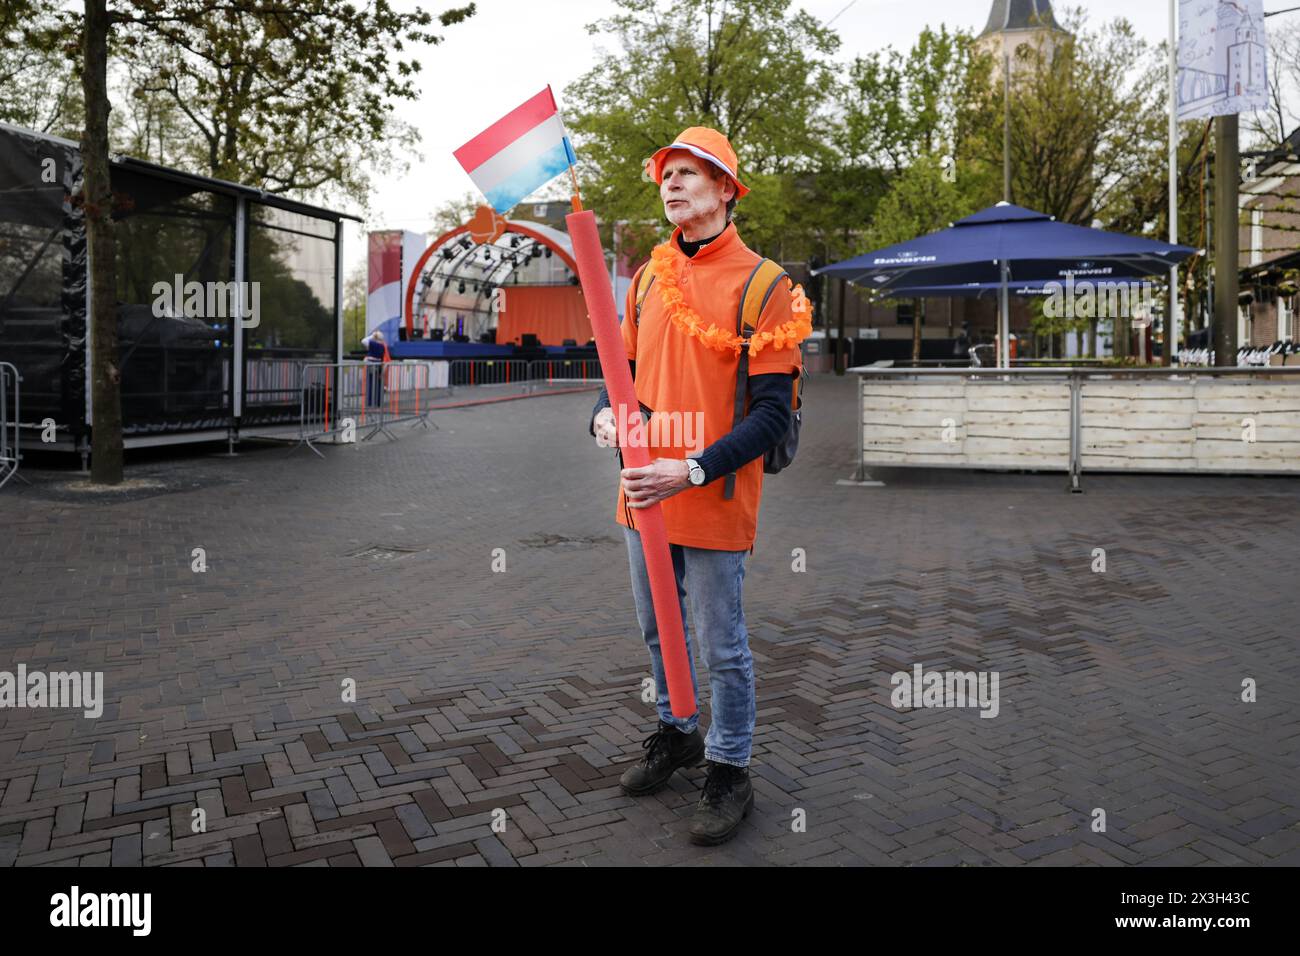 EMMEN - The first Orange fans have taken a place along the route that the royal family takes through the center of Emmen. ANP RAMON VAN FLYMEN netherlands out - belgium out Stock Photo